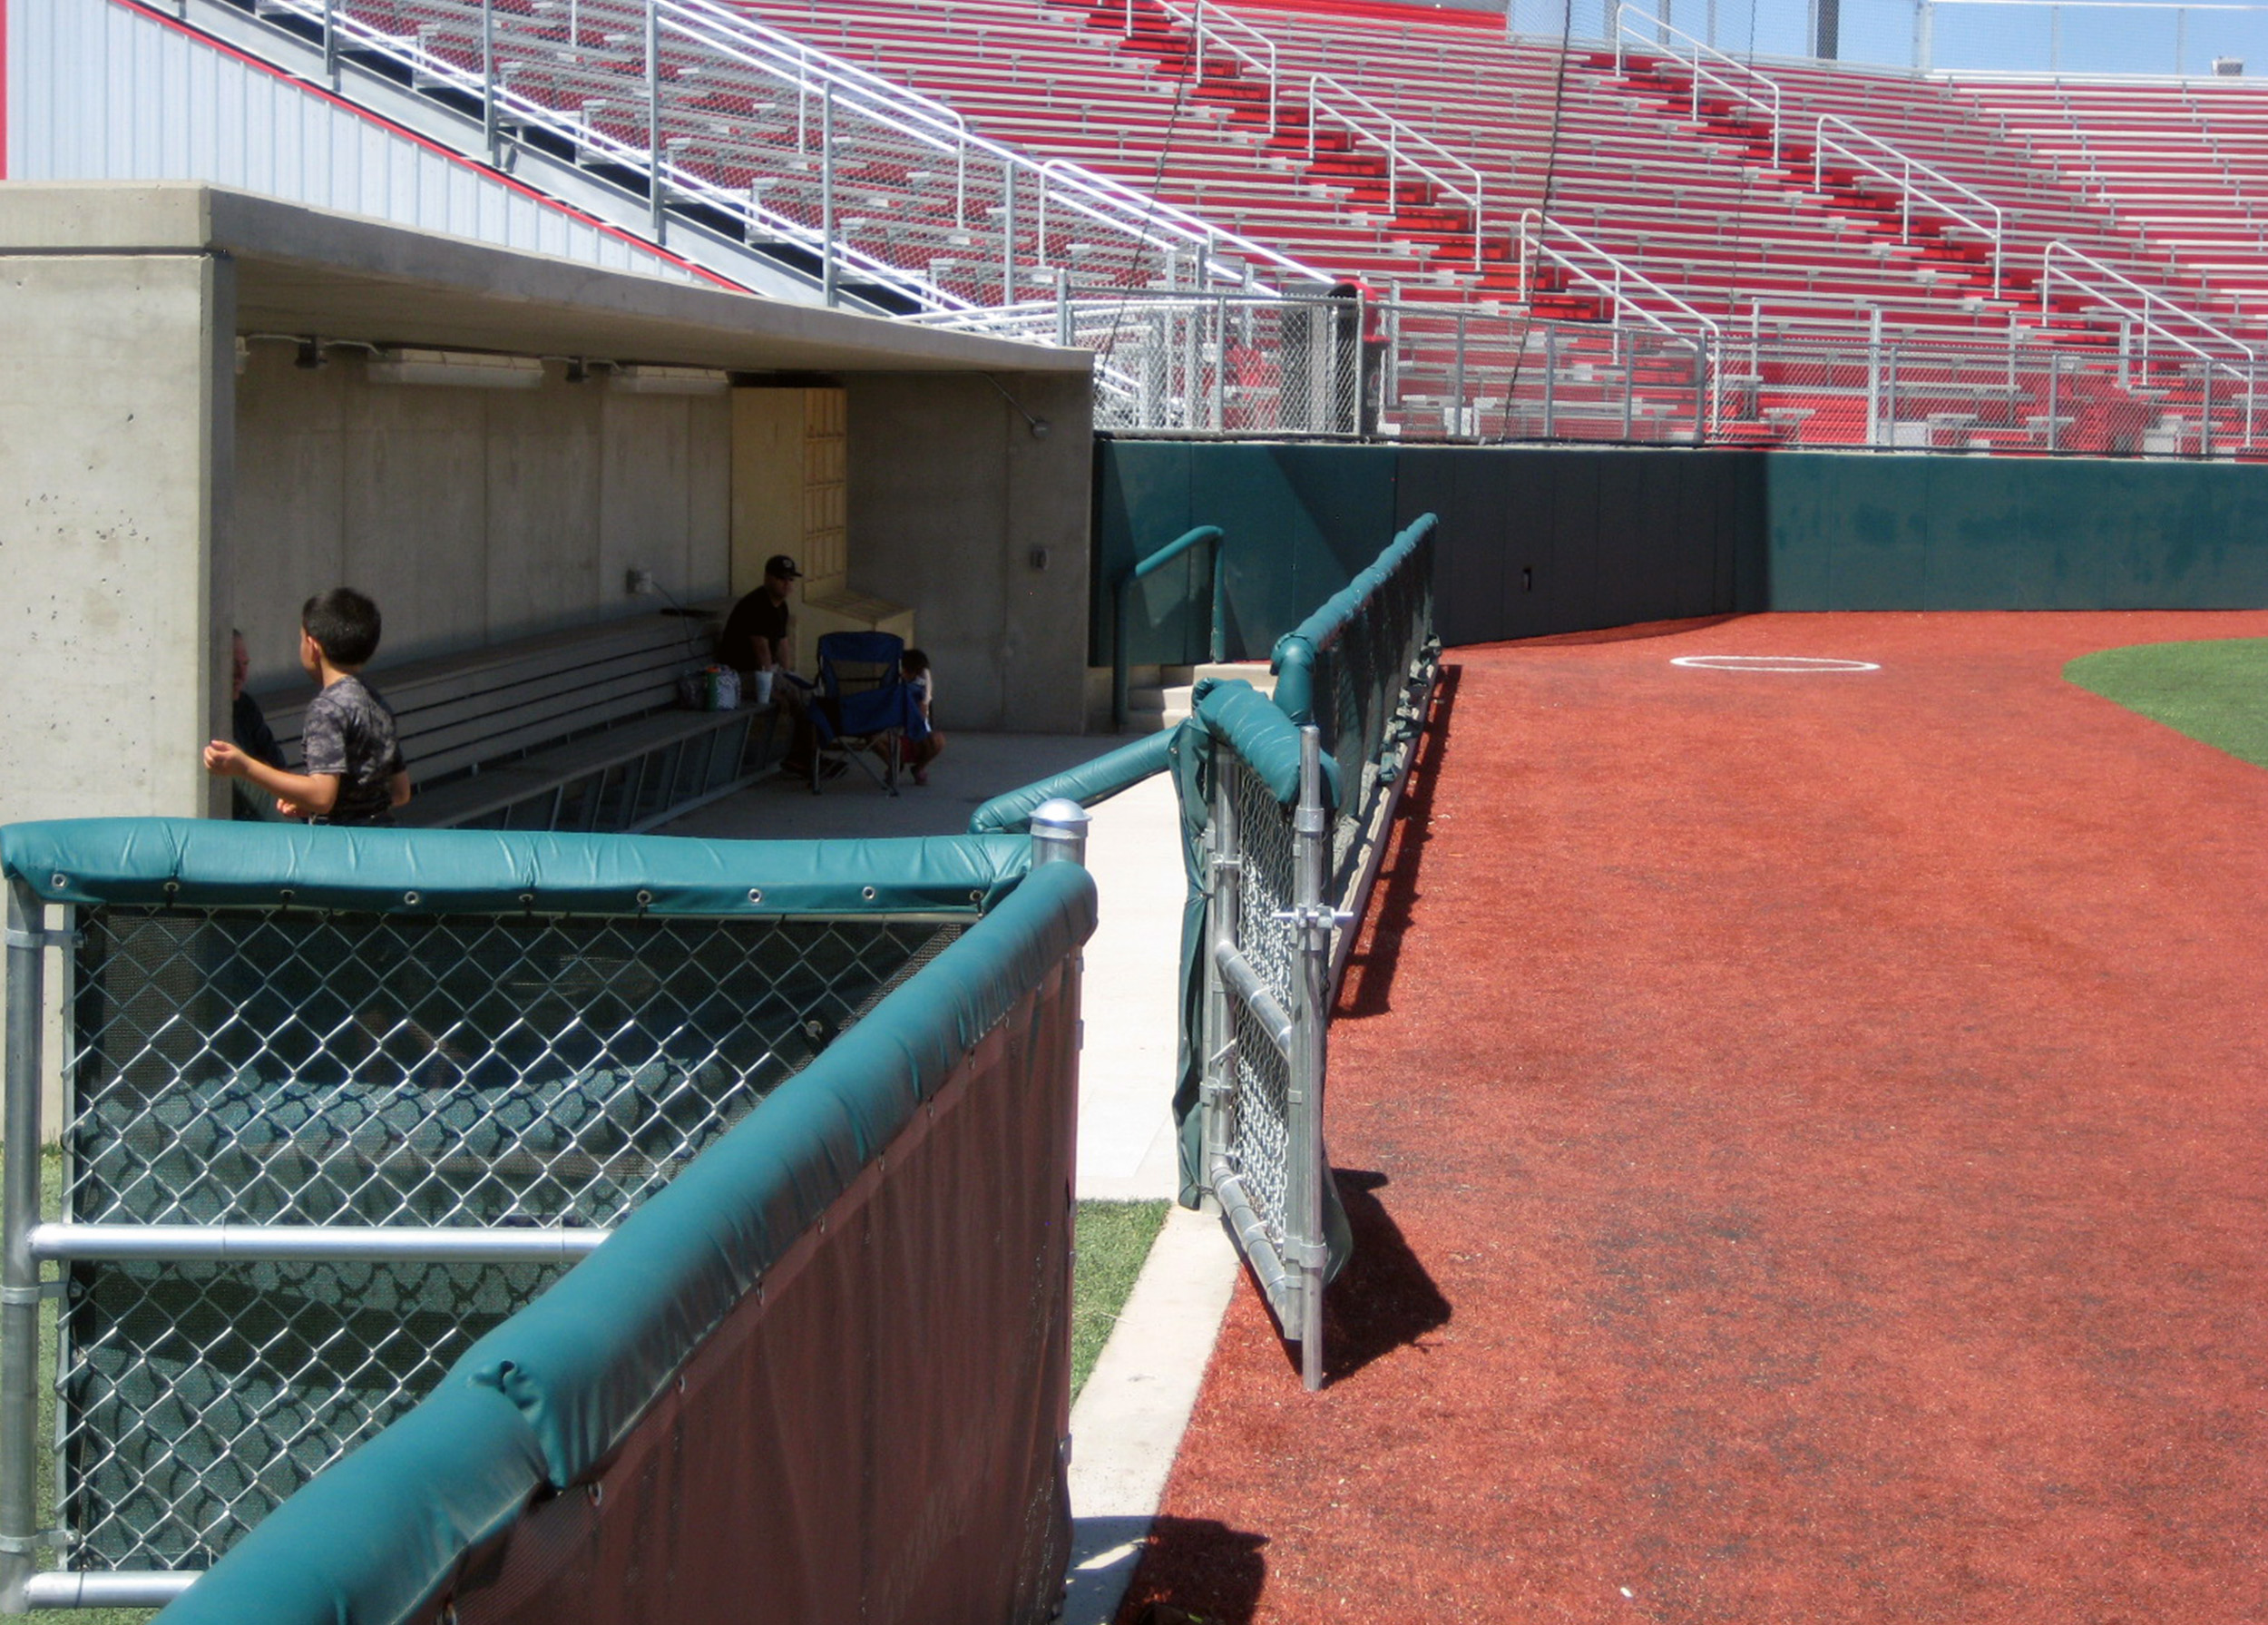 Wilson & Company’s design team communicated with the university staff and baseball team to determine needed outcomes. 